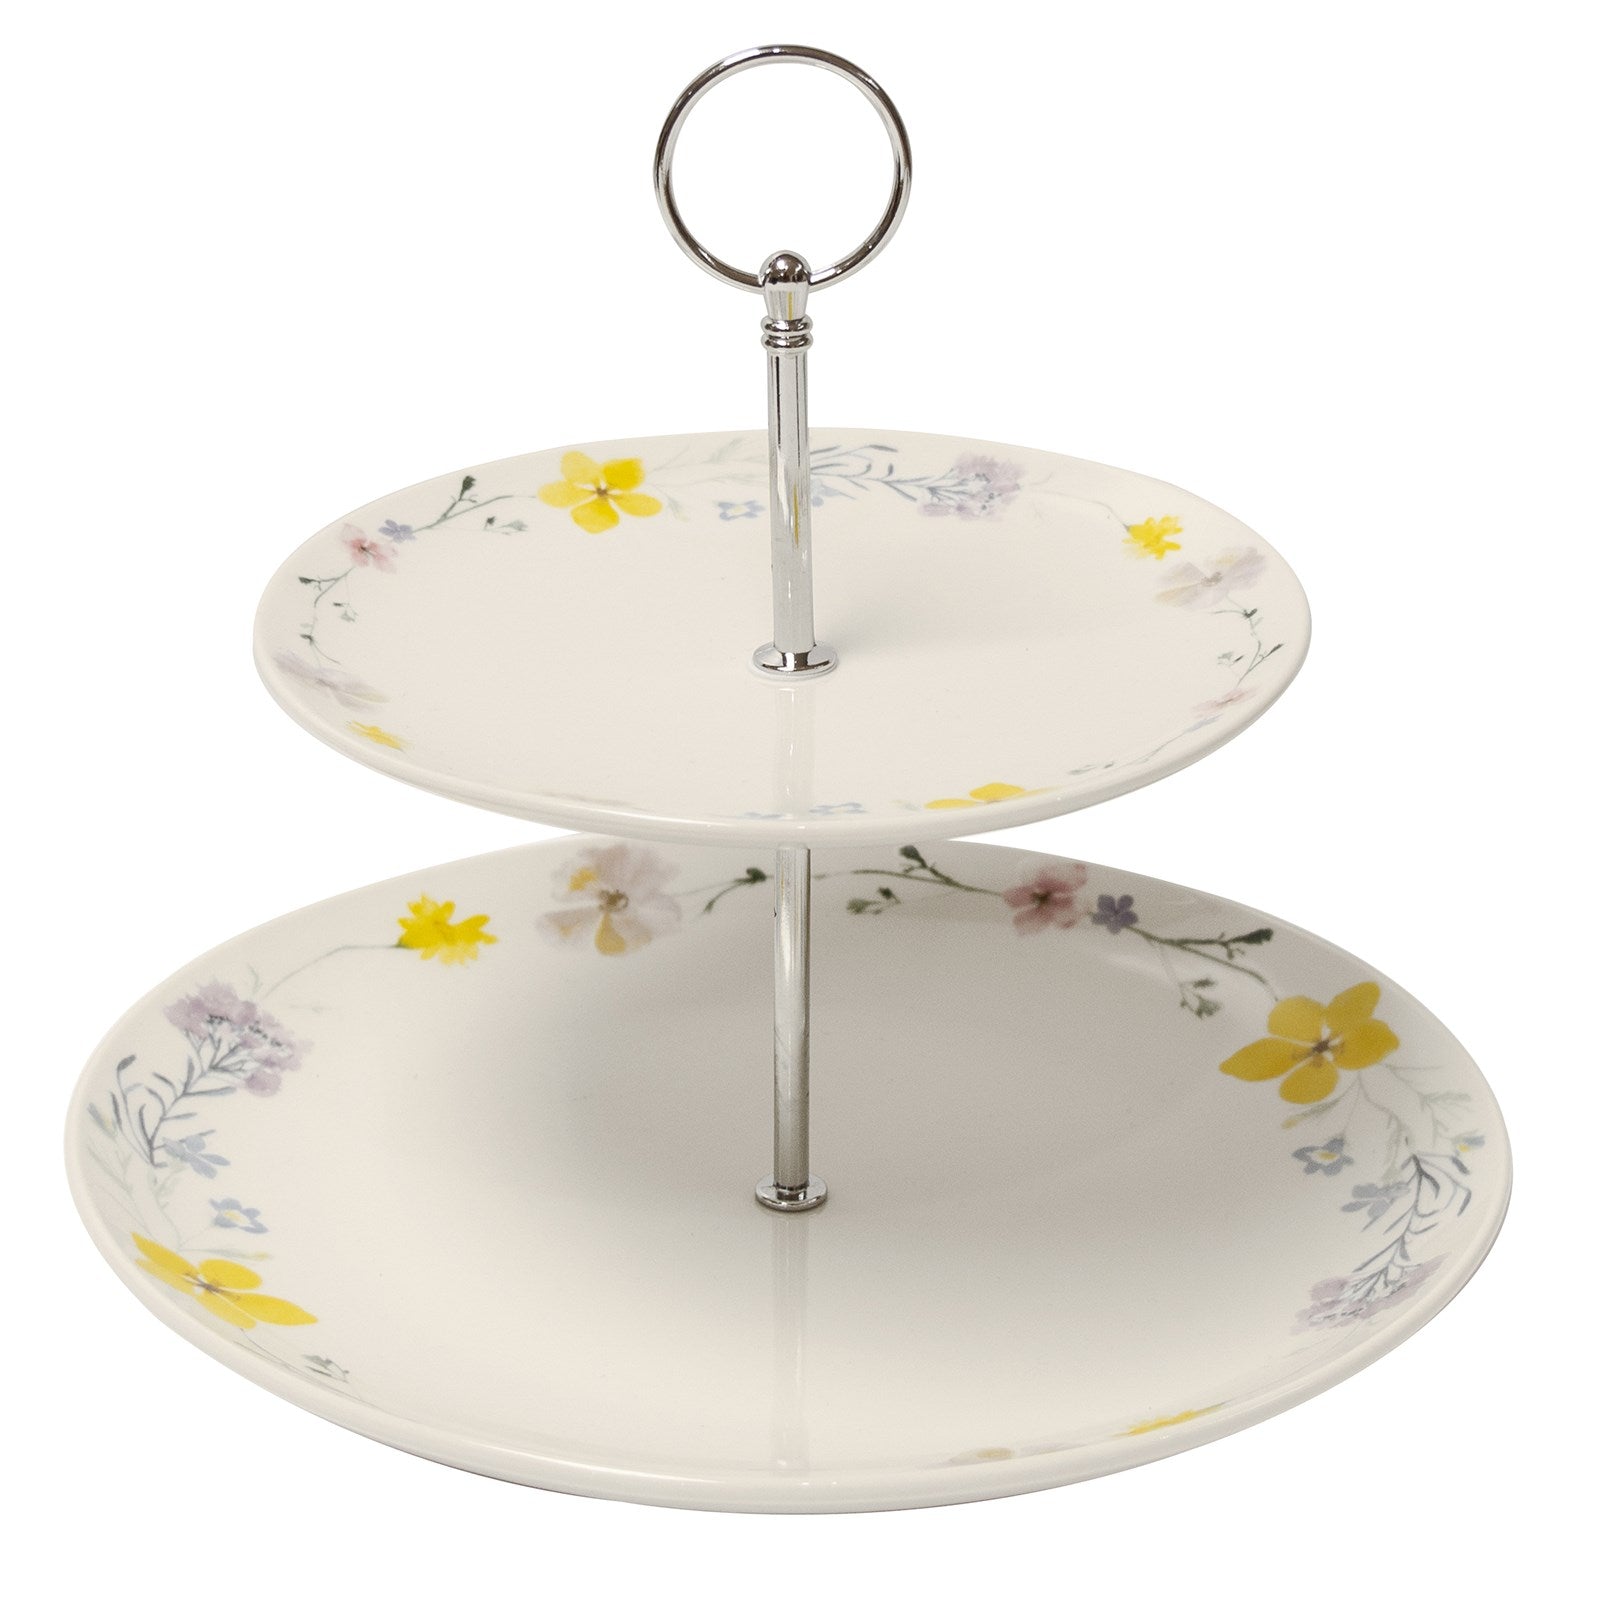 The English Tableware Company Pressed Flowers 2 Tier Cake Stand